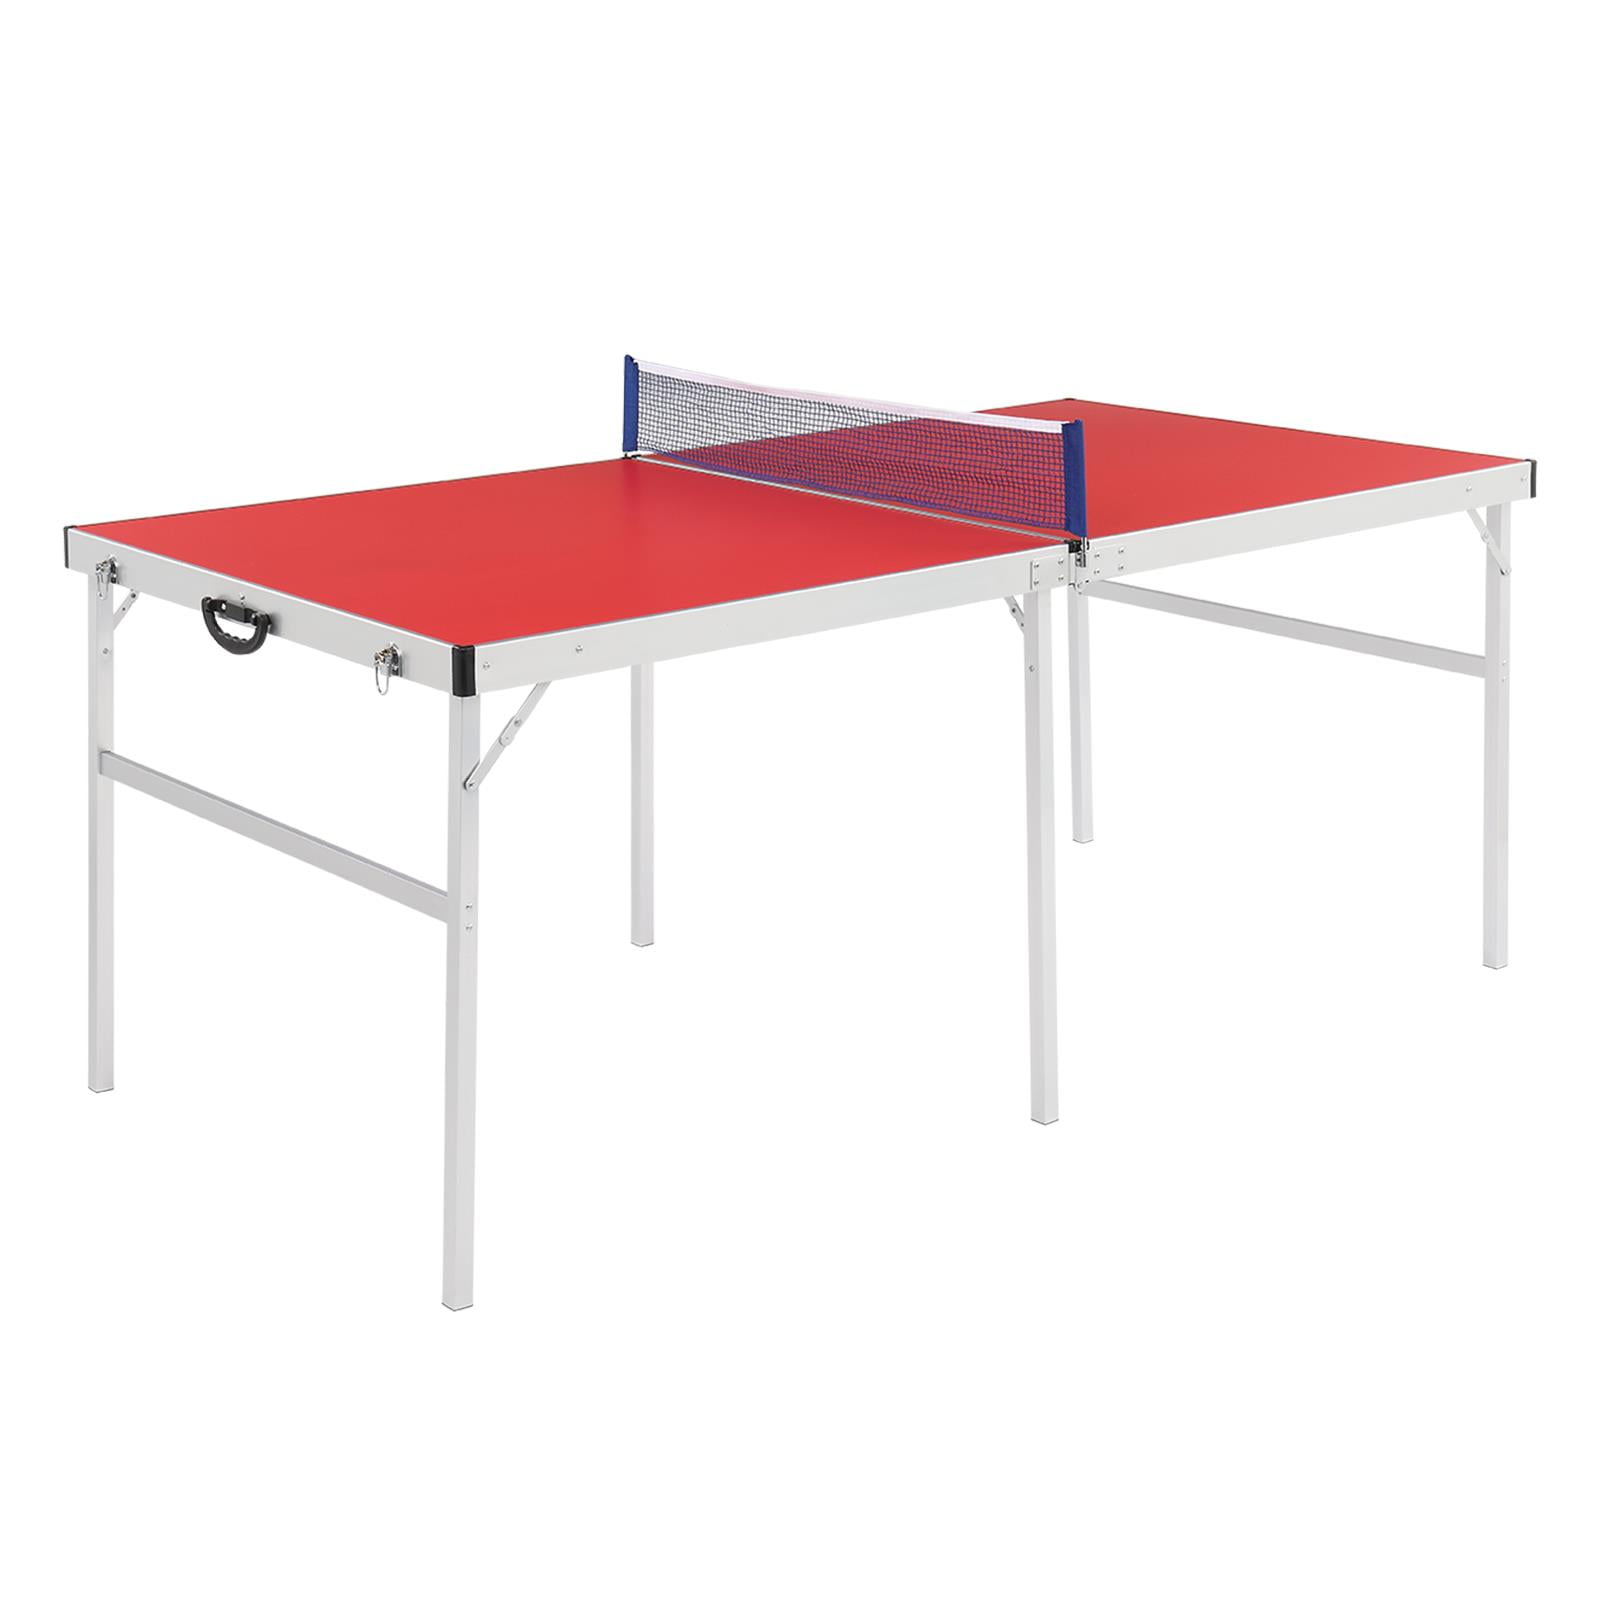 FRANKLIN SPORTS Table Tennis Gray Black Foldable Ping Pong Portable Party Game 